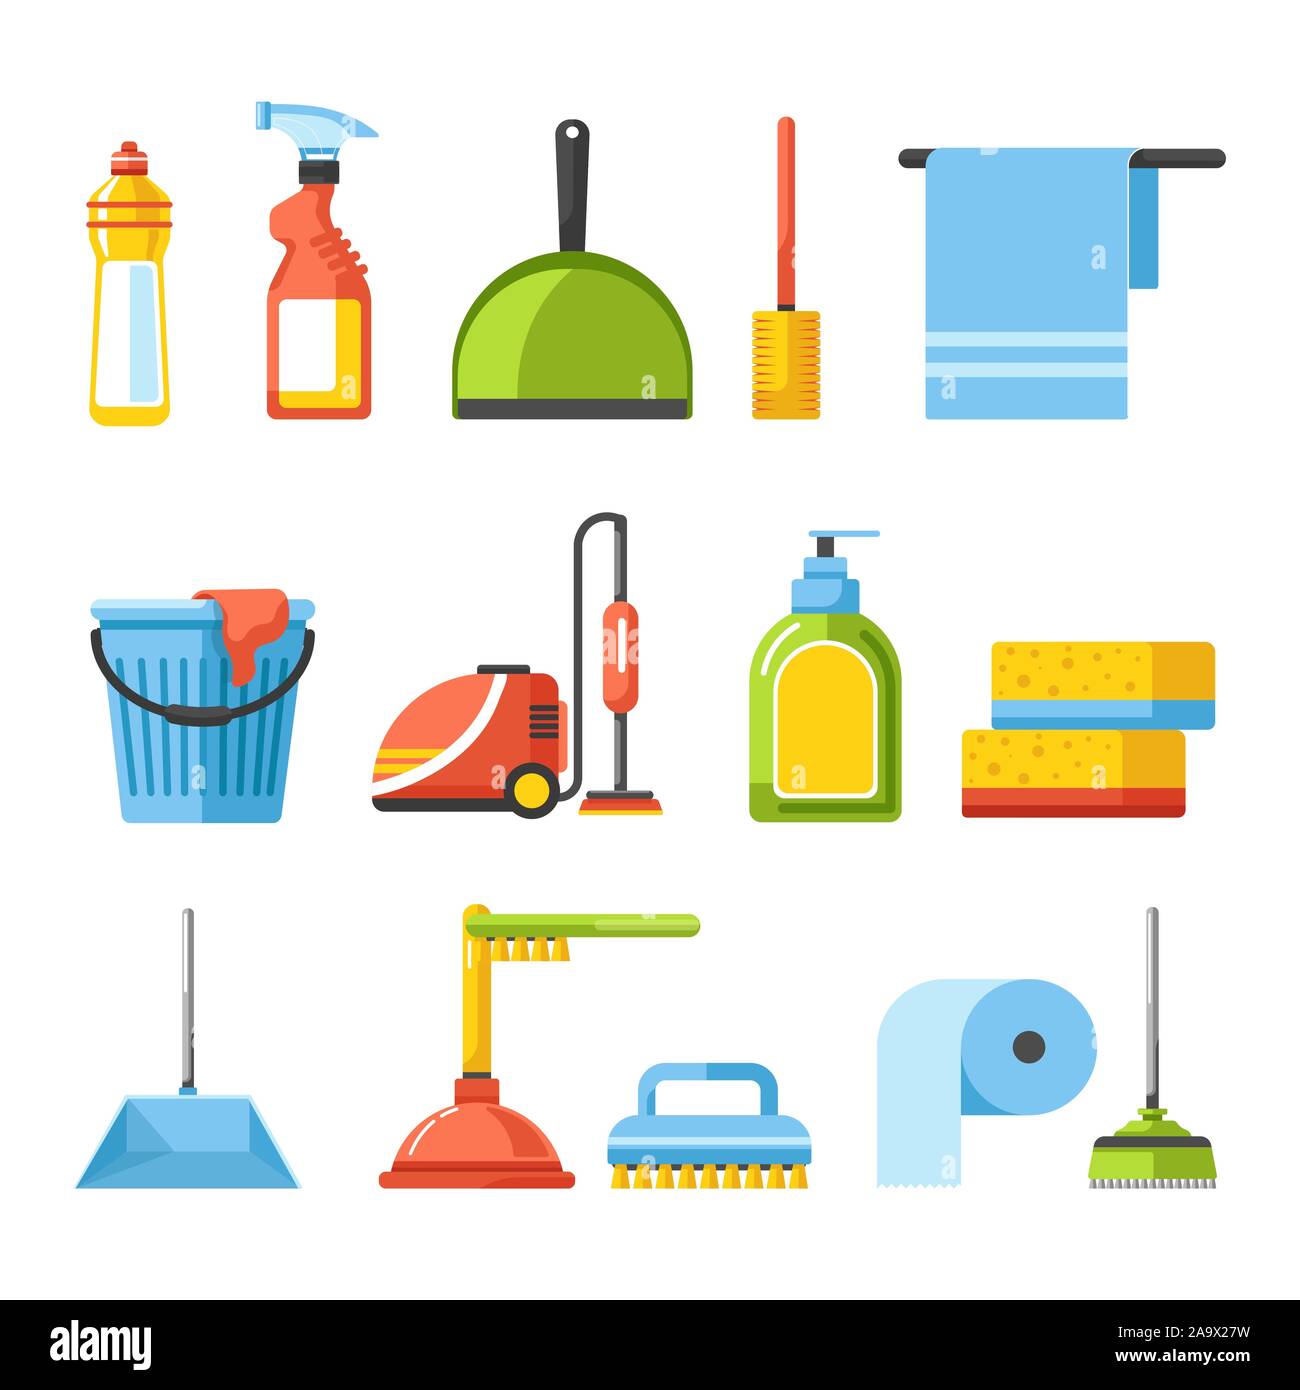 https://c8.alamy.com/comp/2A9X27W/household-and-housekeeping-equipment-cleaning-tools-isolated-icons-2A9X27W.jpg